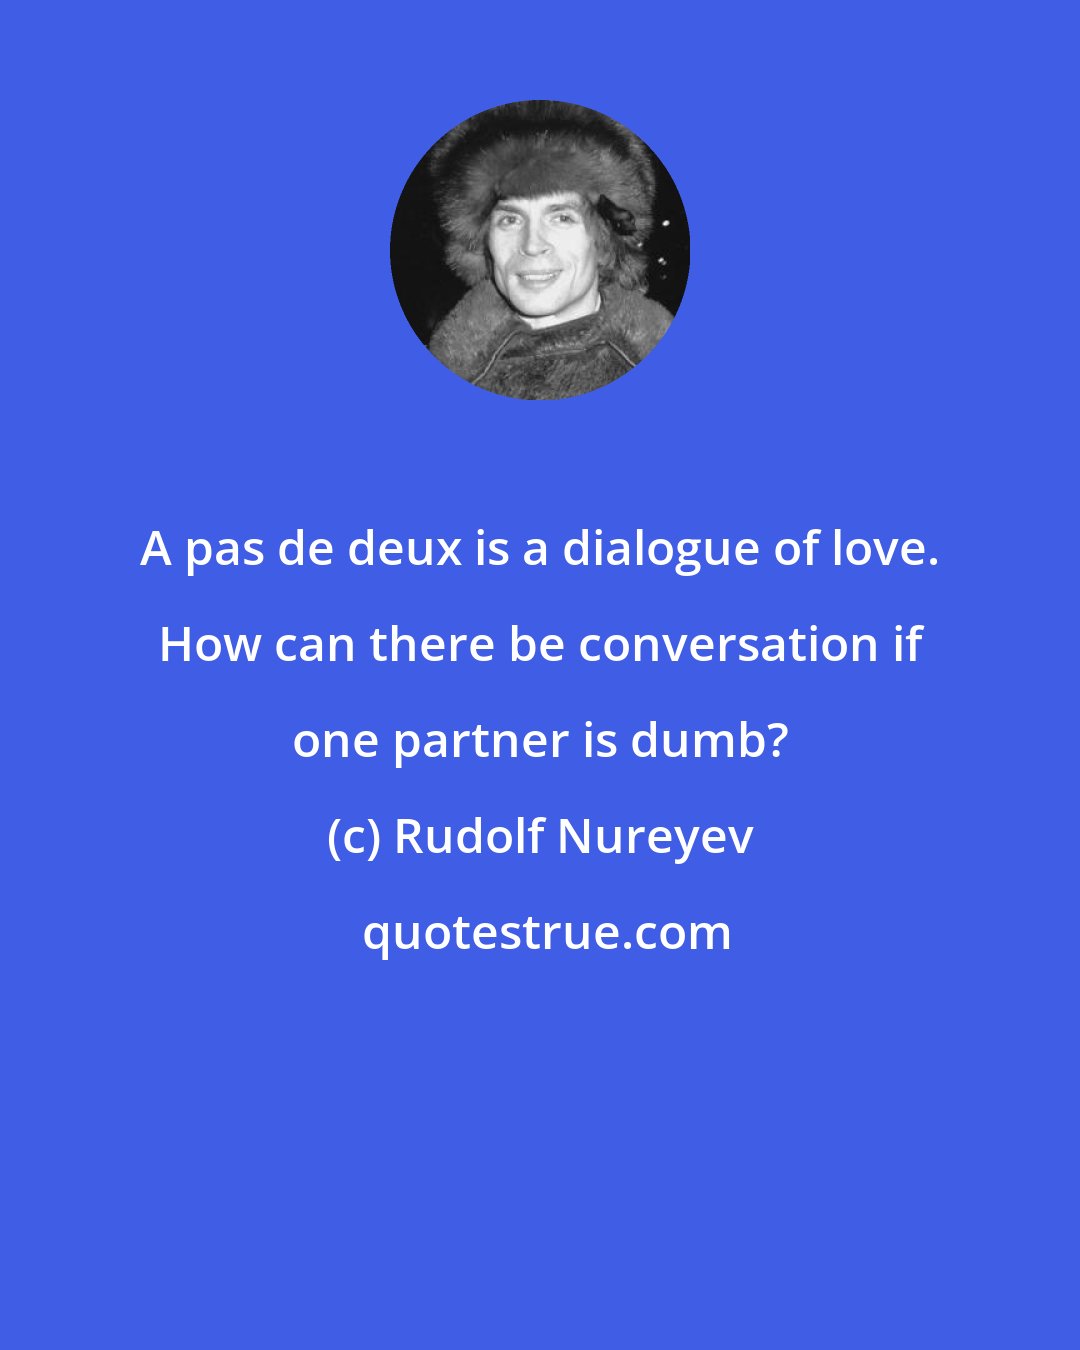 Rudolf Nureyev: A pas de deux is a dialogue of love. How can there be conversation if one partner is dumb?